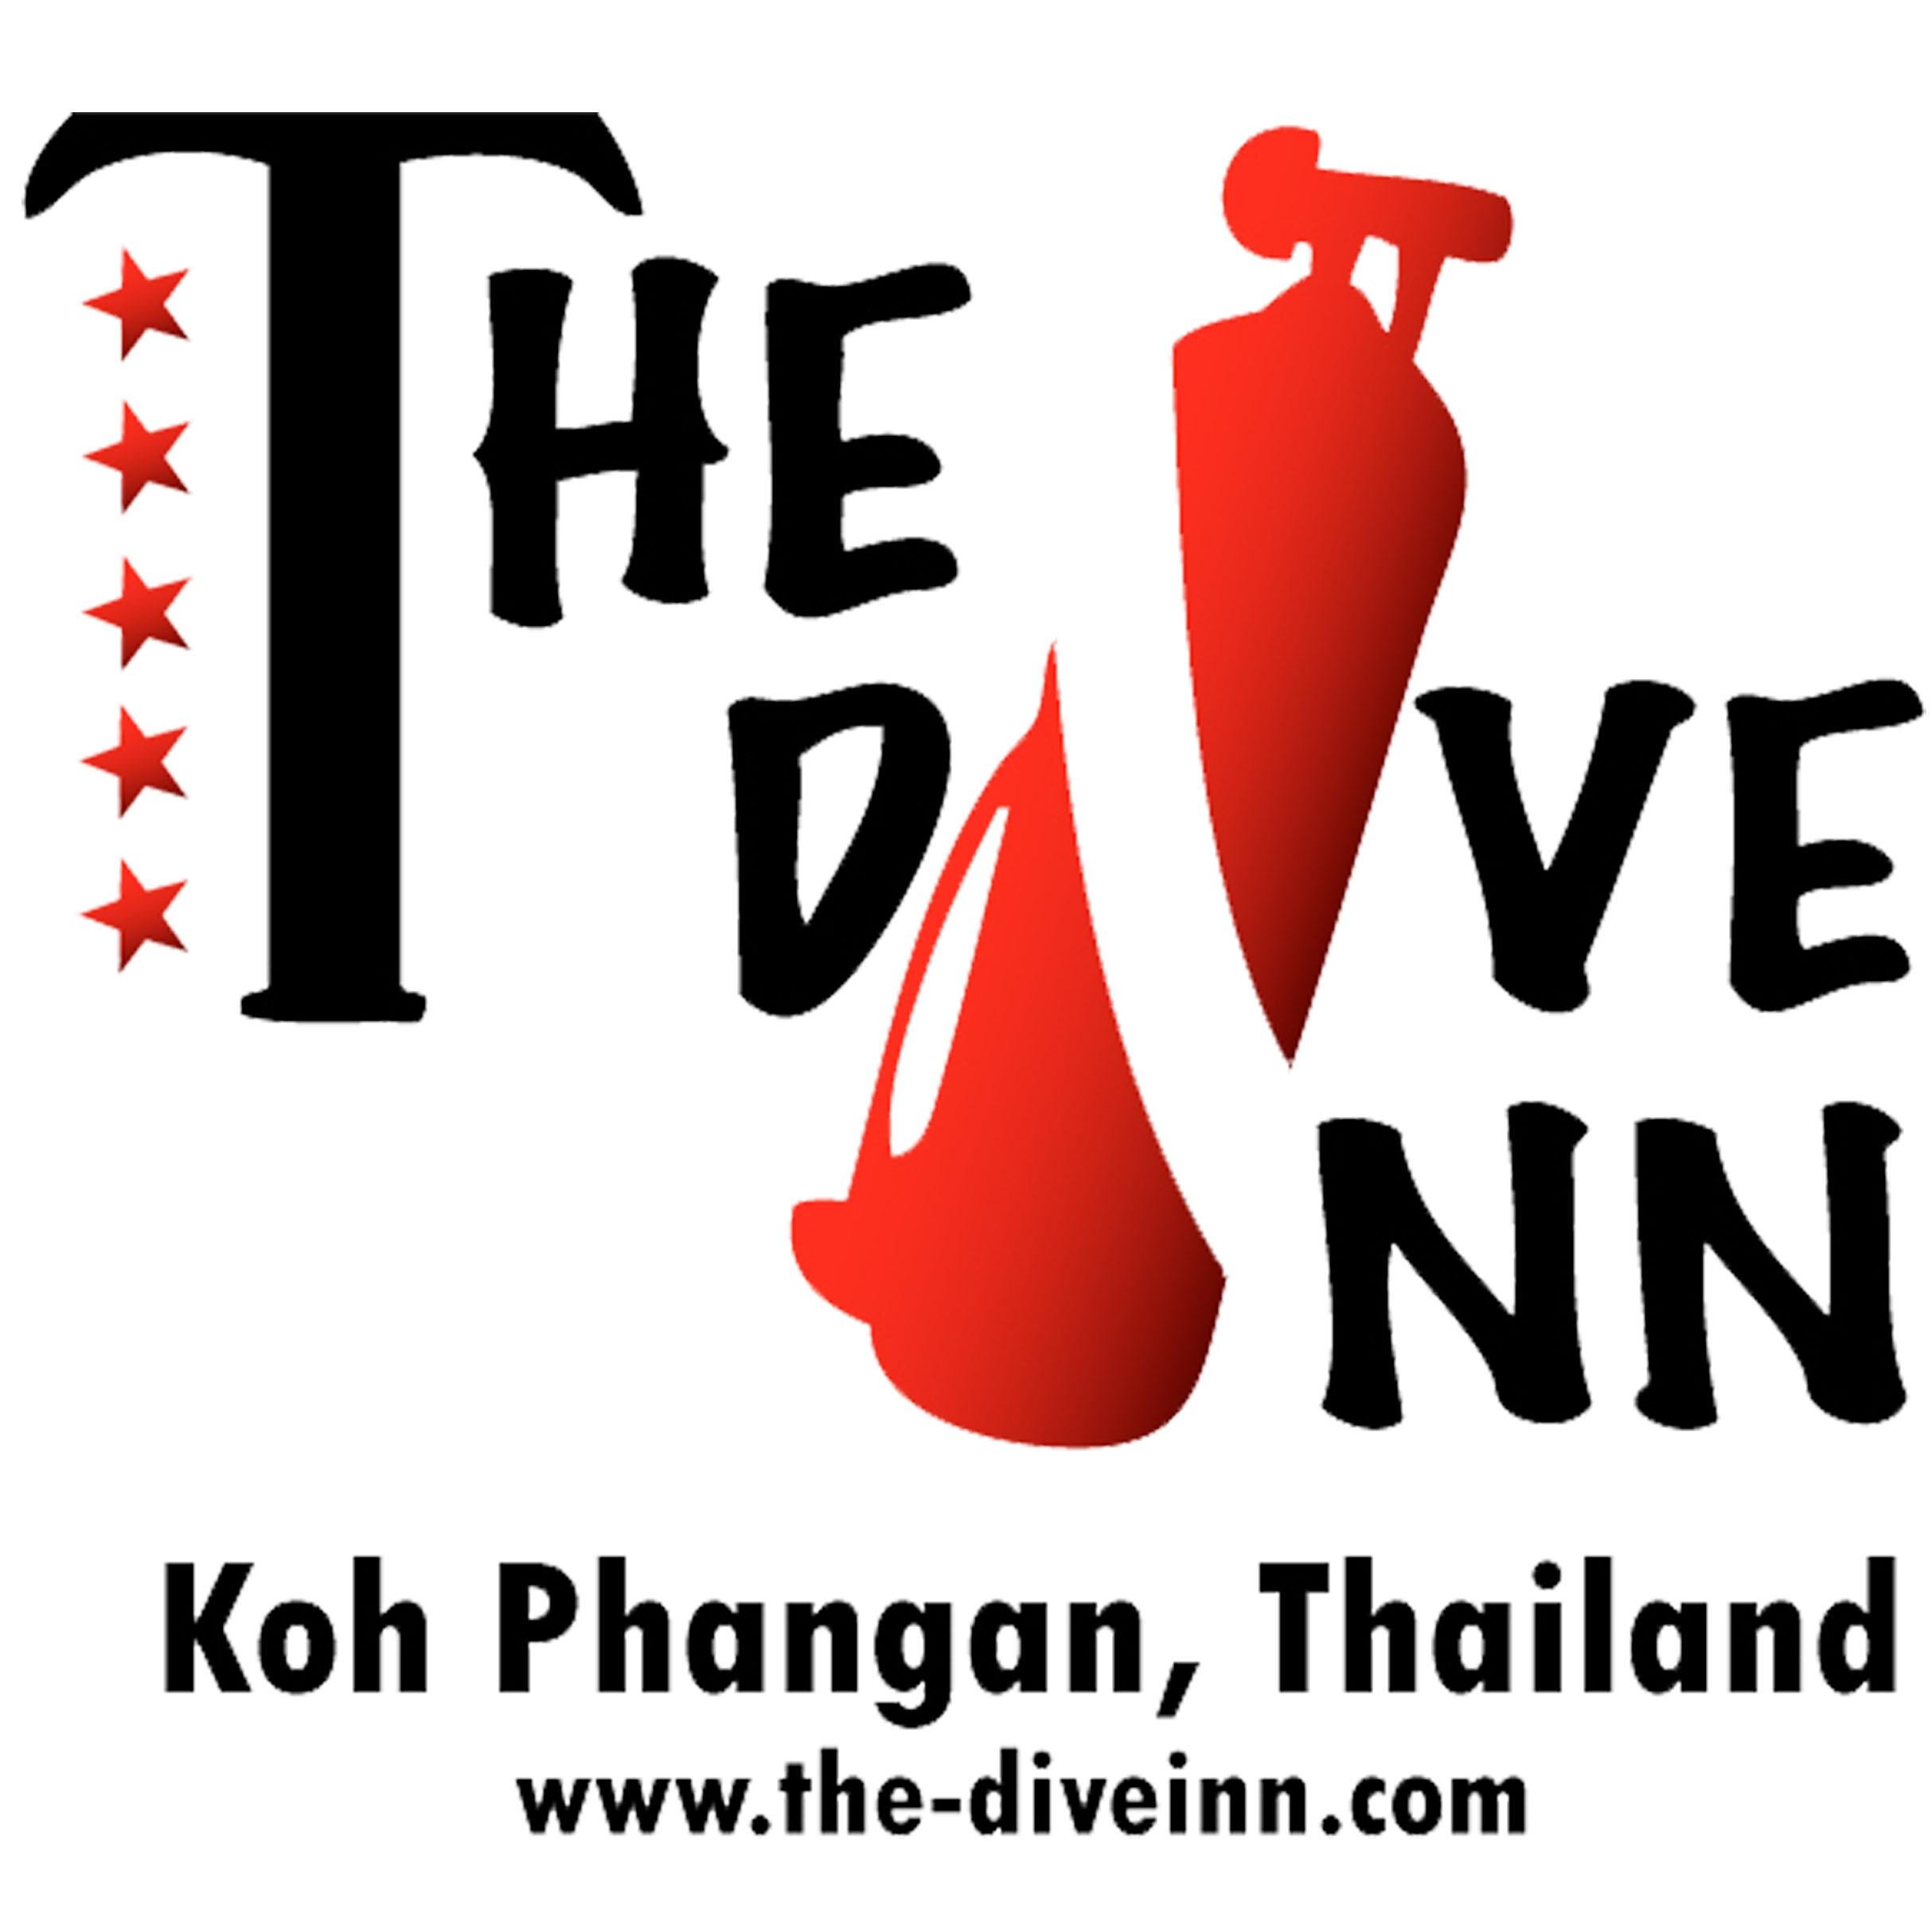 Based at the north of the island, in the fishing village of Chaloklum, The Dive Inn is one of the longest established scuba diving centres on Koh Phangan.